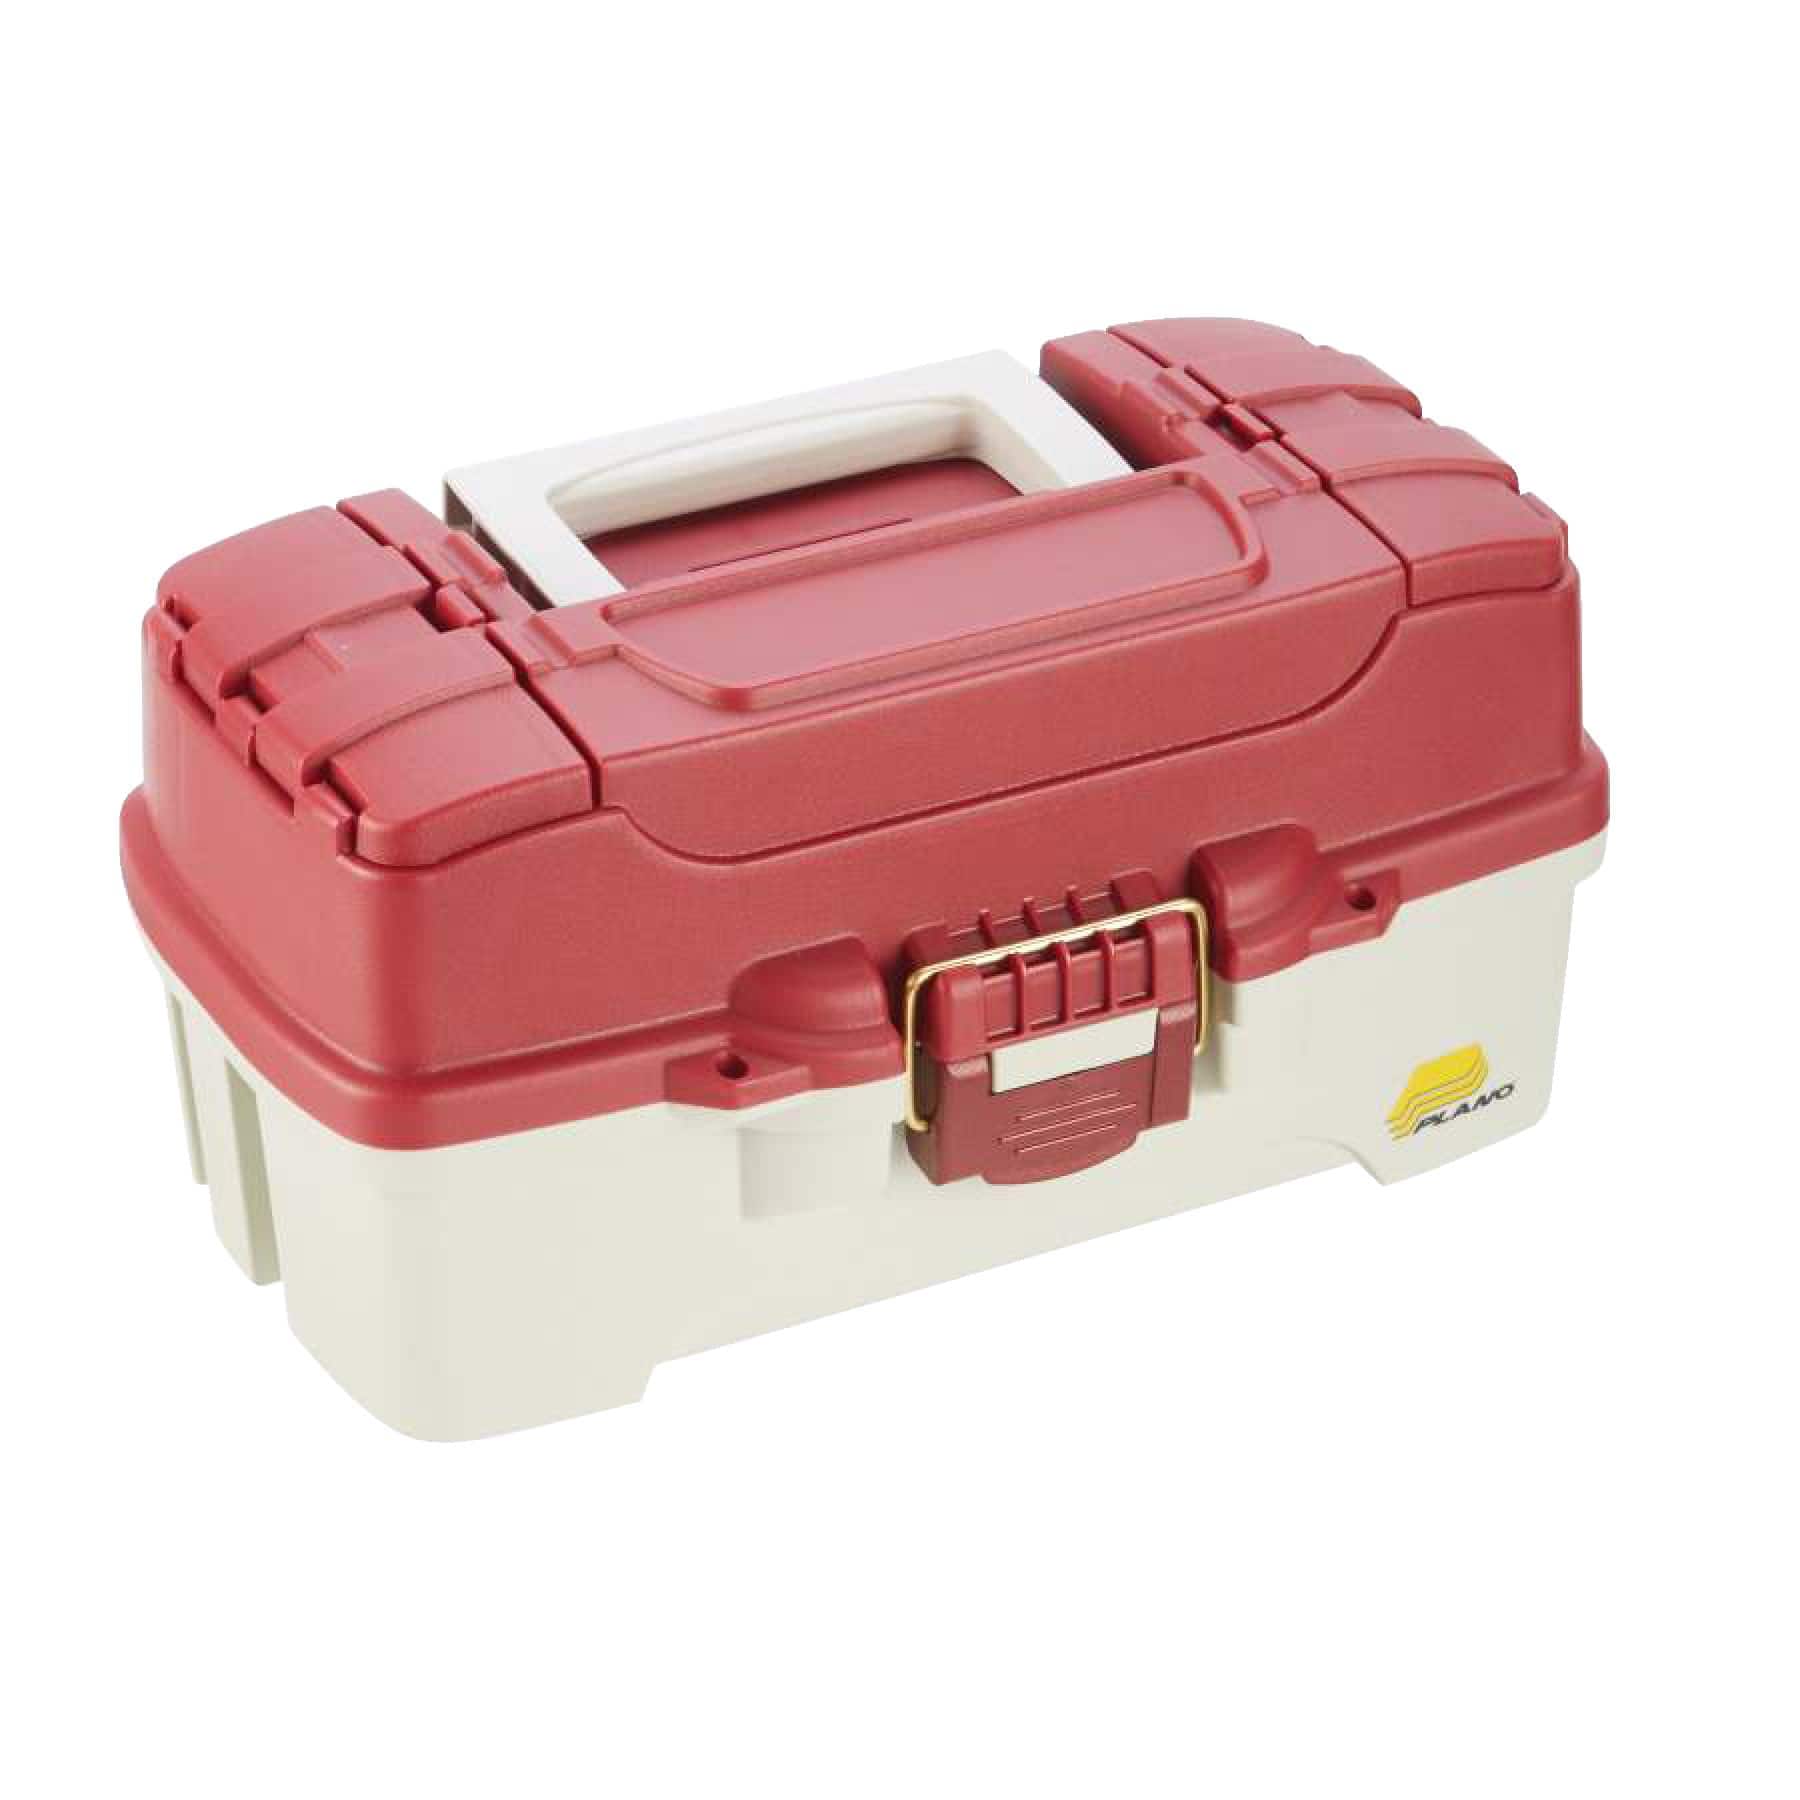 Brand New Fishing Tackle Box Plastic Small And Portable Wear